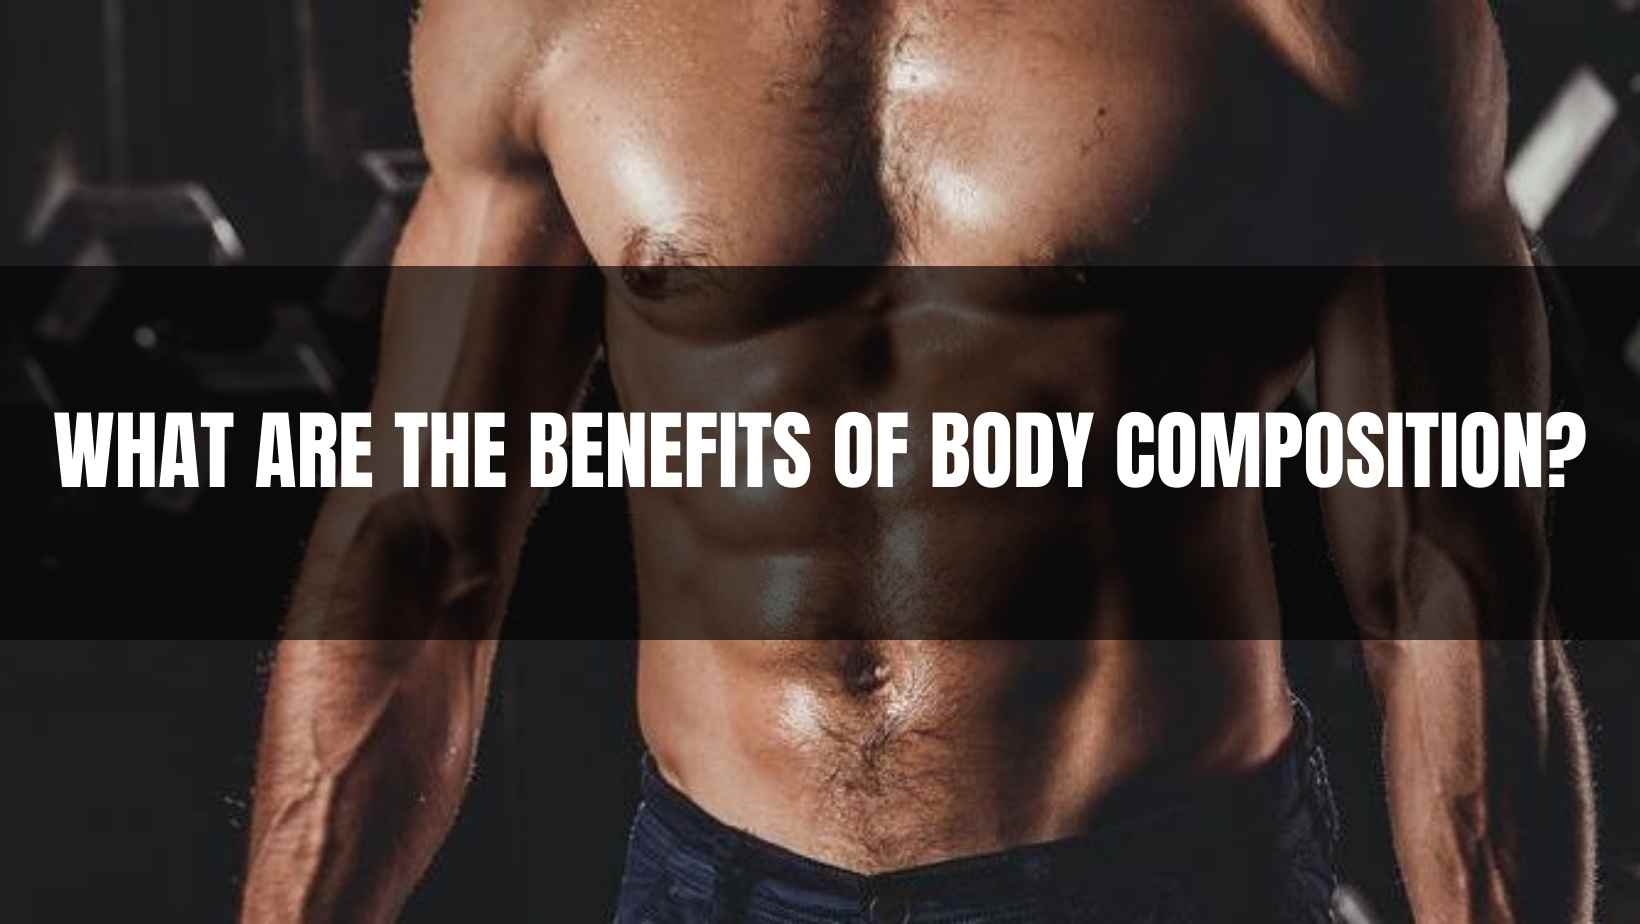 Benefits of Body Composition